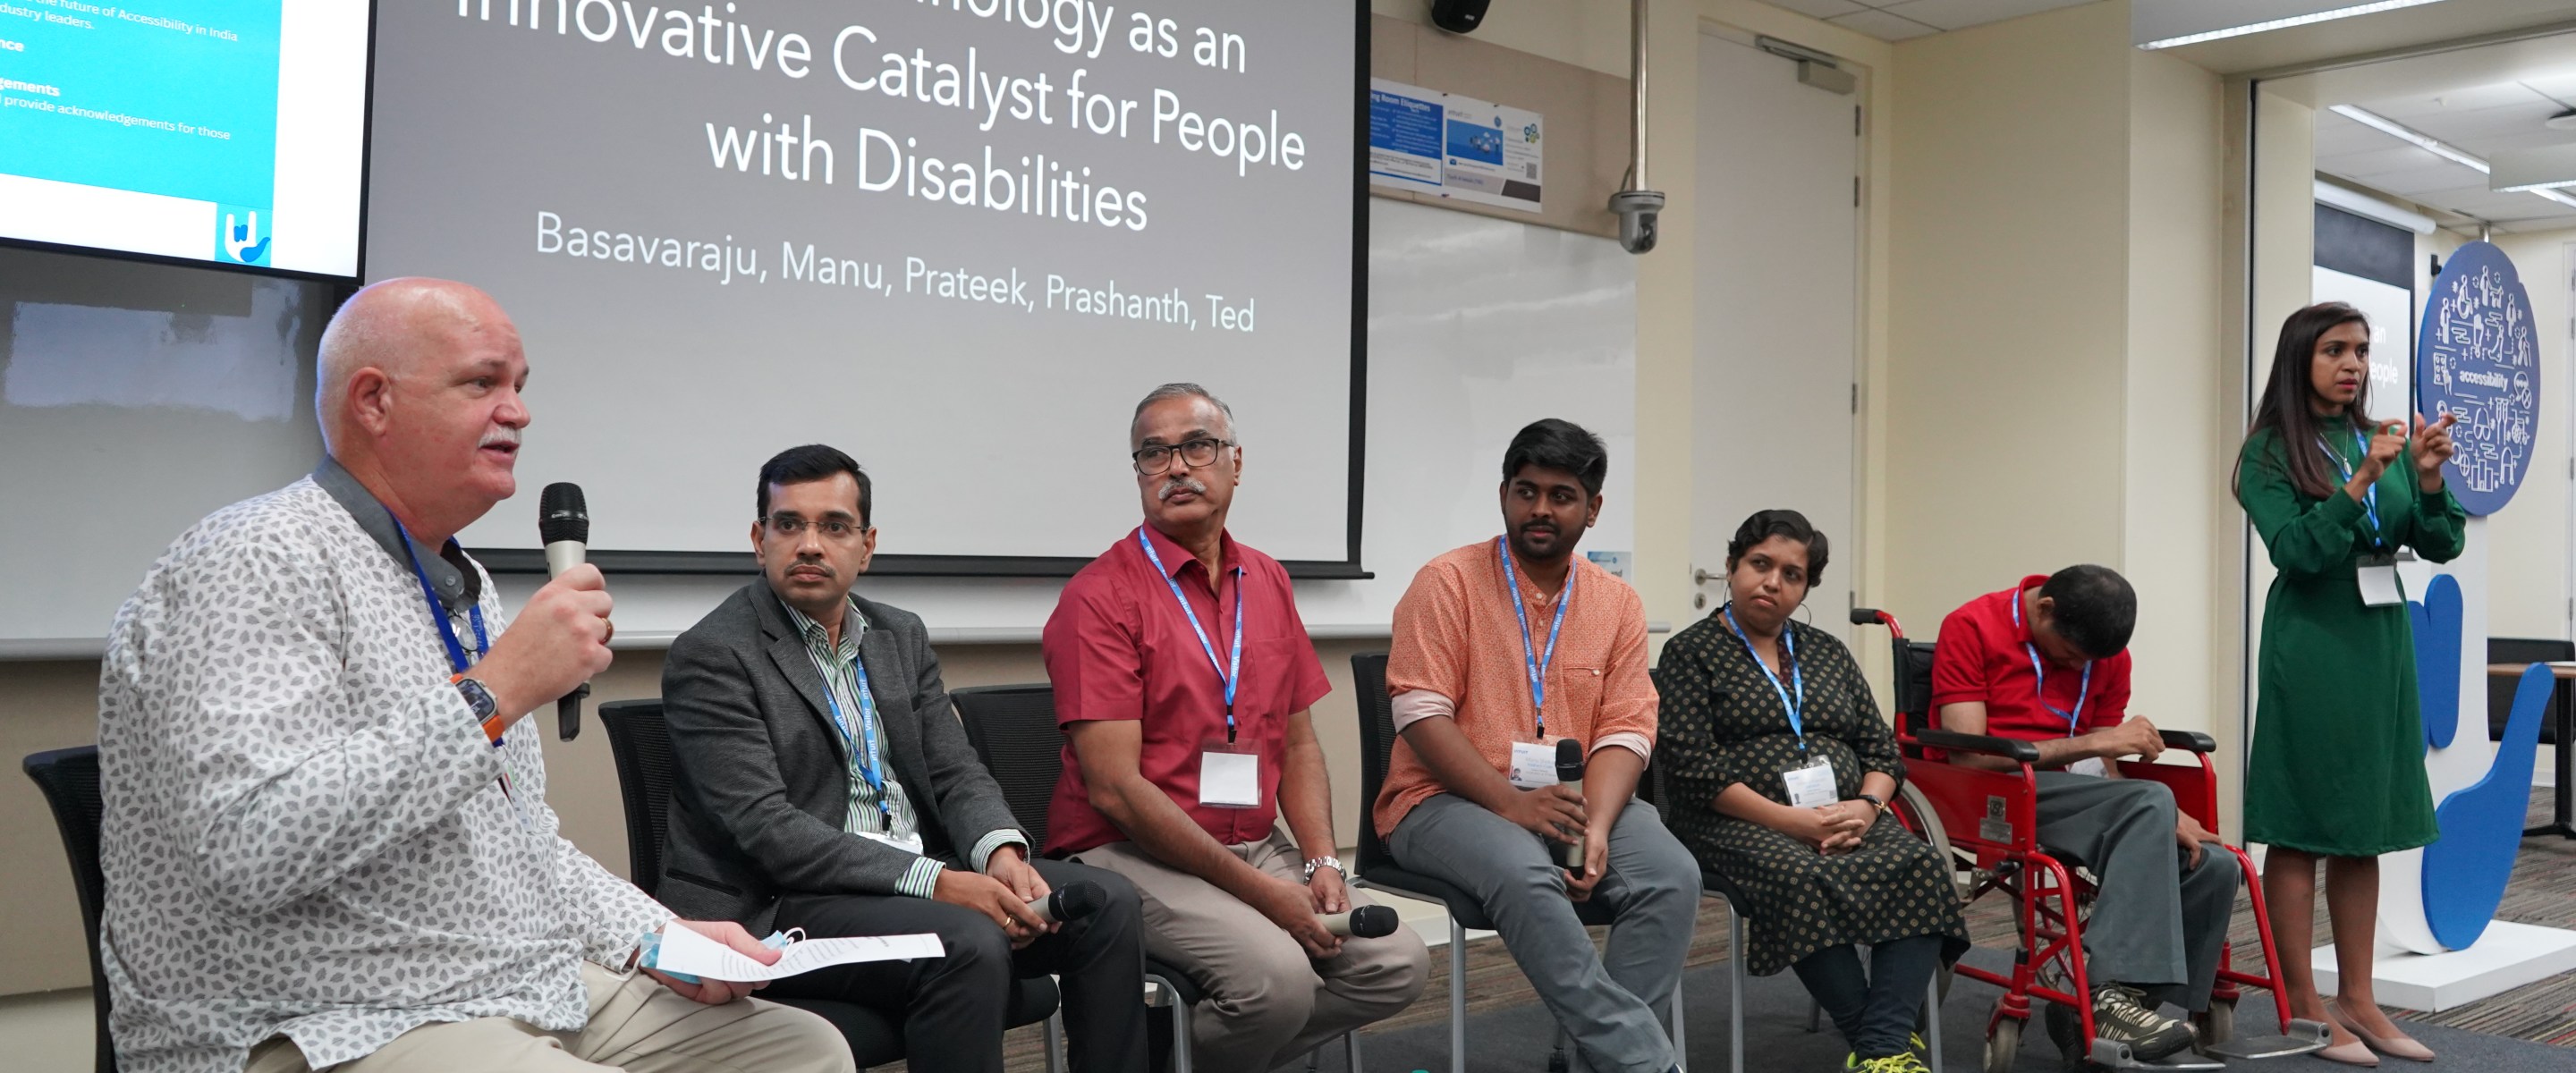 A diverse group of people on stage with a background reading, "Technology as an innovative catalyst for people with disabilities.: